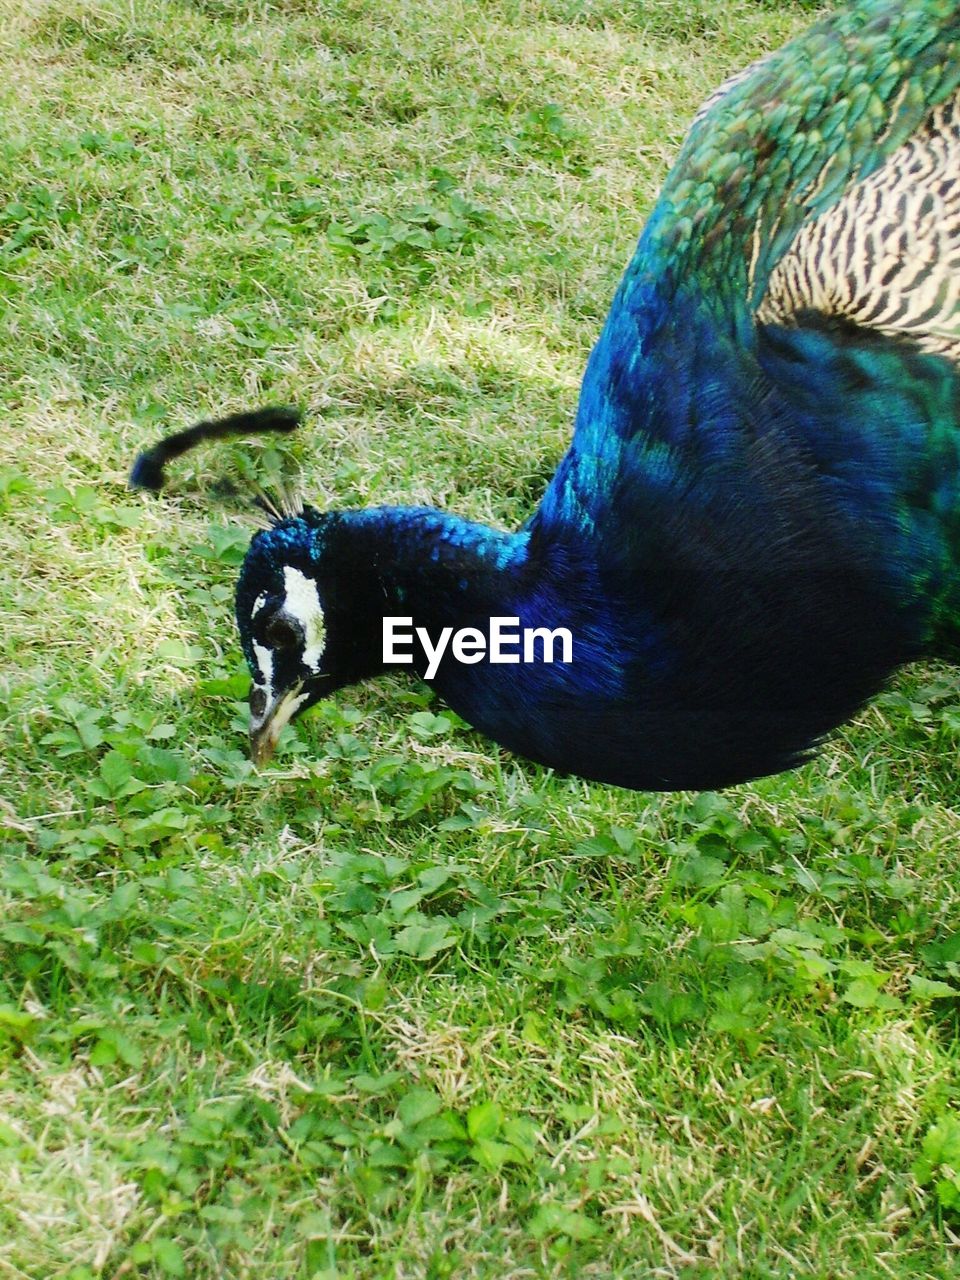 CLOSE-UP OF PEACOCK ON GRASS